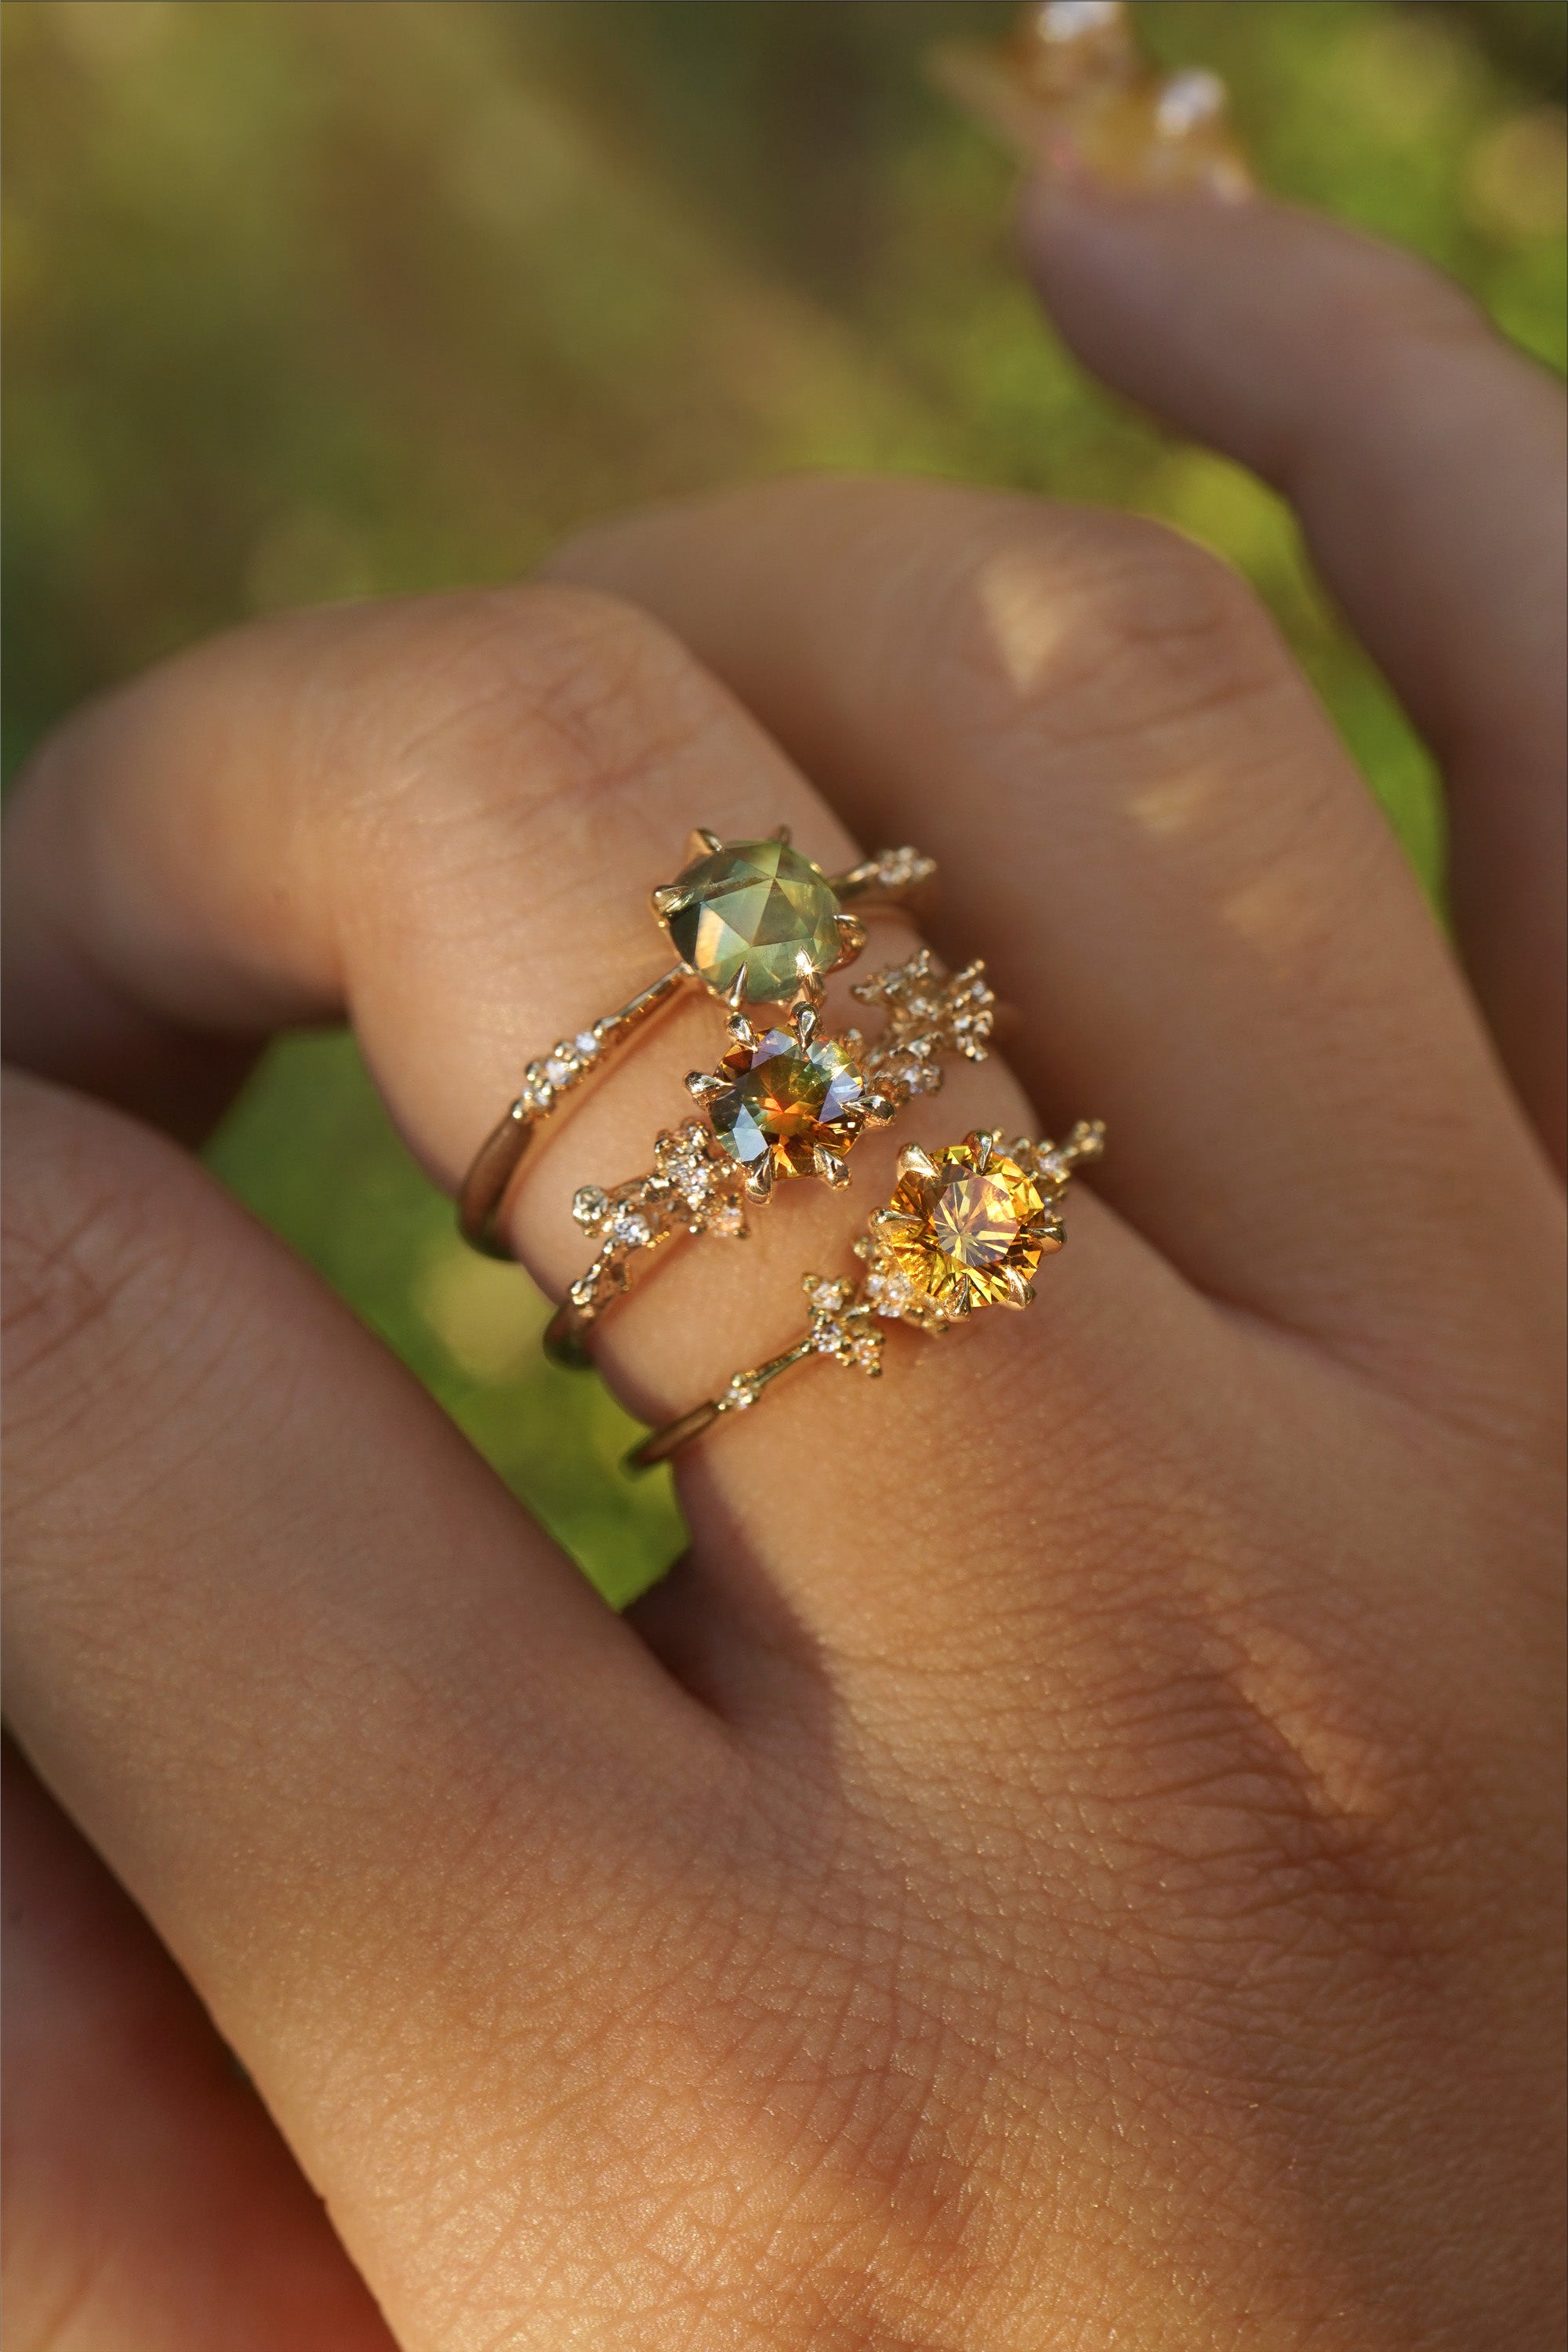 A hand wearing three yellow gold rings by Laurie Fleming Jewellery. The top ring is an Ilona style and features a round rose cut green sapphire on a delicate band with diamonds on the shoulders. In the middle, an Asrai Garden ring with a round orange-blue sapphire centre and carved cherry blossoms on the band featuring diamonds. At the base of the finger, a one of a kind Water Lily ring with a round bright yellow sapphire with clusters of diamonds on the band. The background looks like out of focus plants.